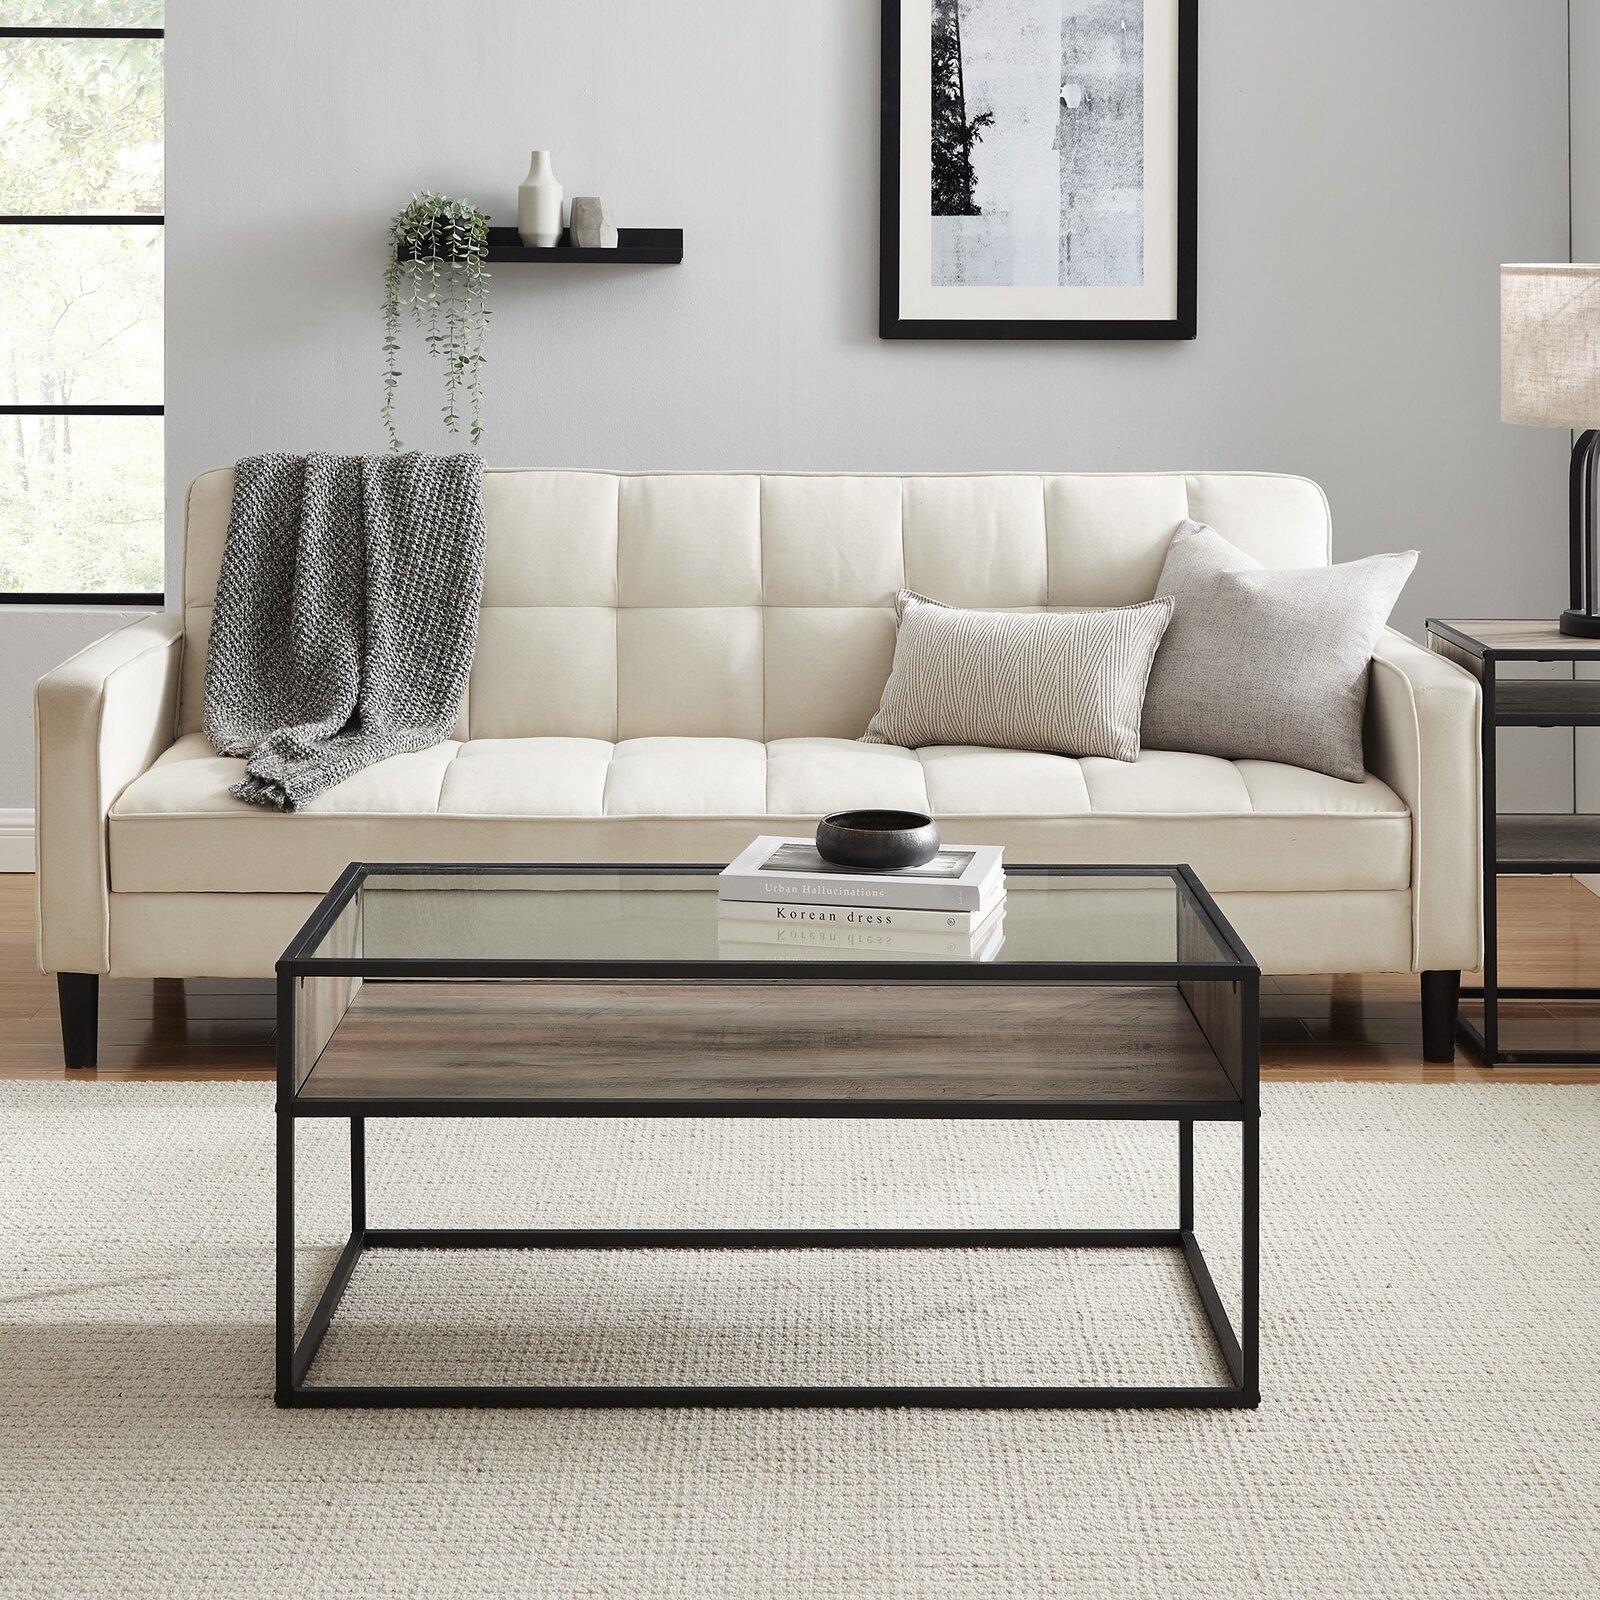 The gray wash tempered glass coffee table